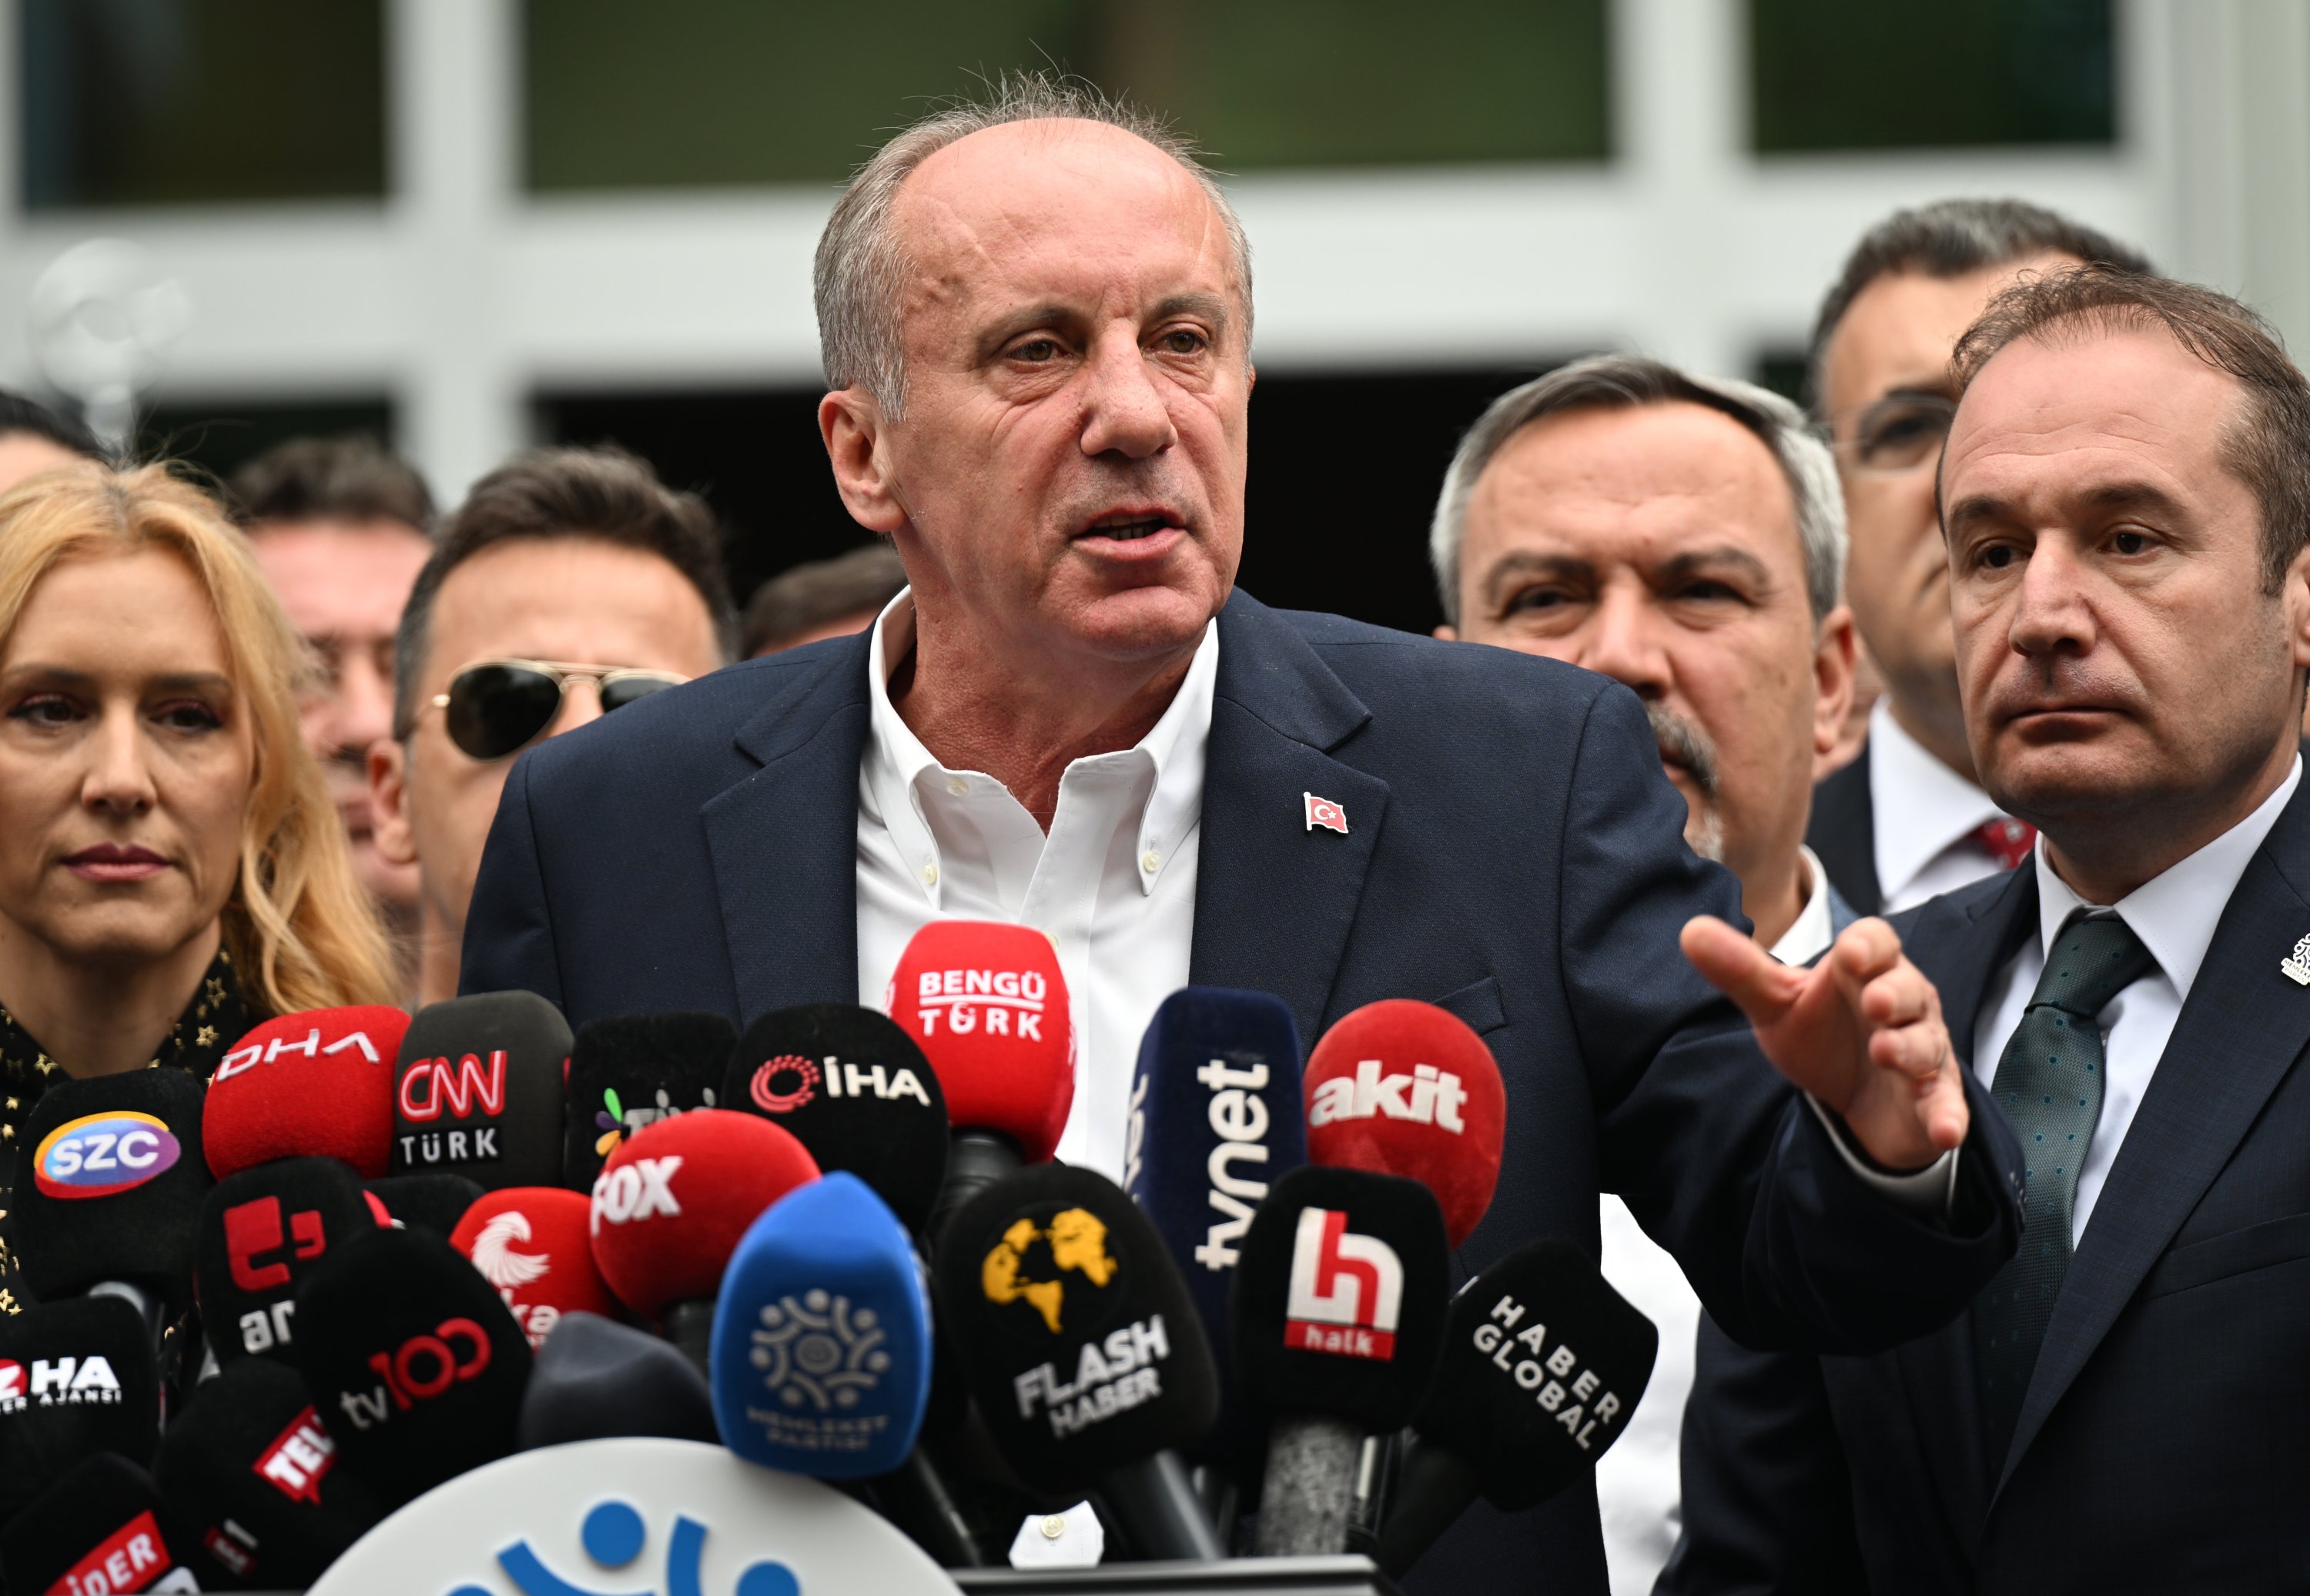 Turkish opposition candidate Muharrem Ince drops out of election race | Daily Sabah